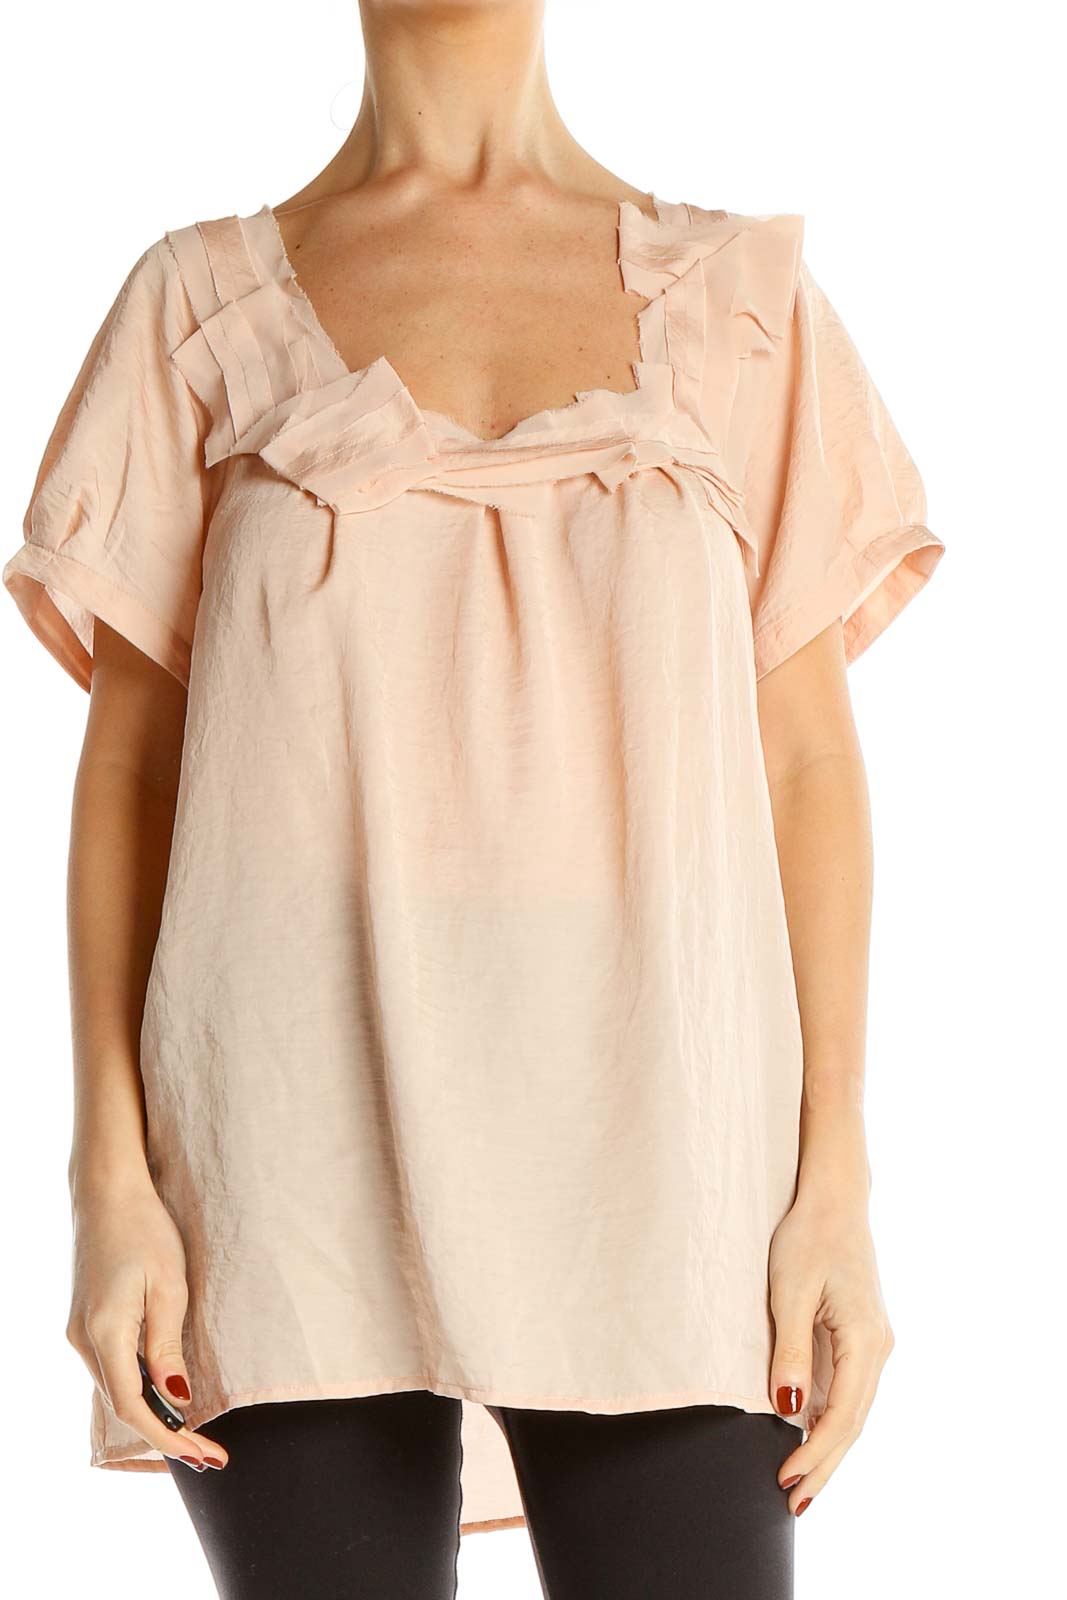 Pink Ruffle Blouse Front